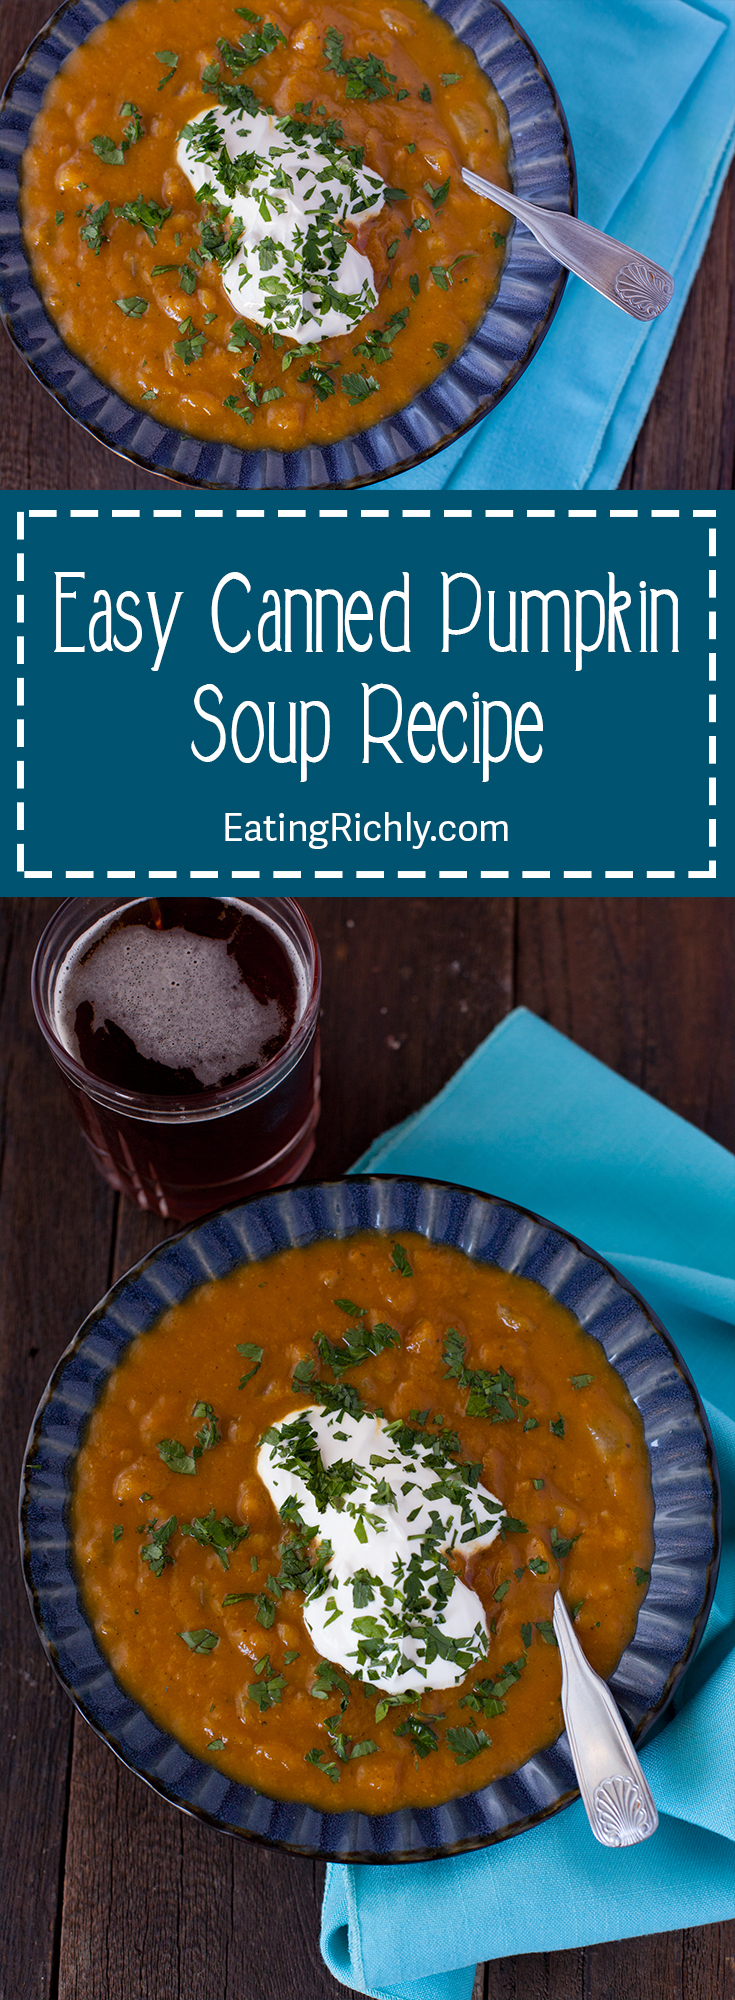 This easy pumpkin soup recipe with canned pumpkin doesn't taste like baby food, takes less than 10 minutes of hands on time, and makes a great freezer meal. Easily dairy free, vegan, paleo, gluten free. From EatingRichly.com